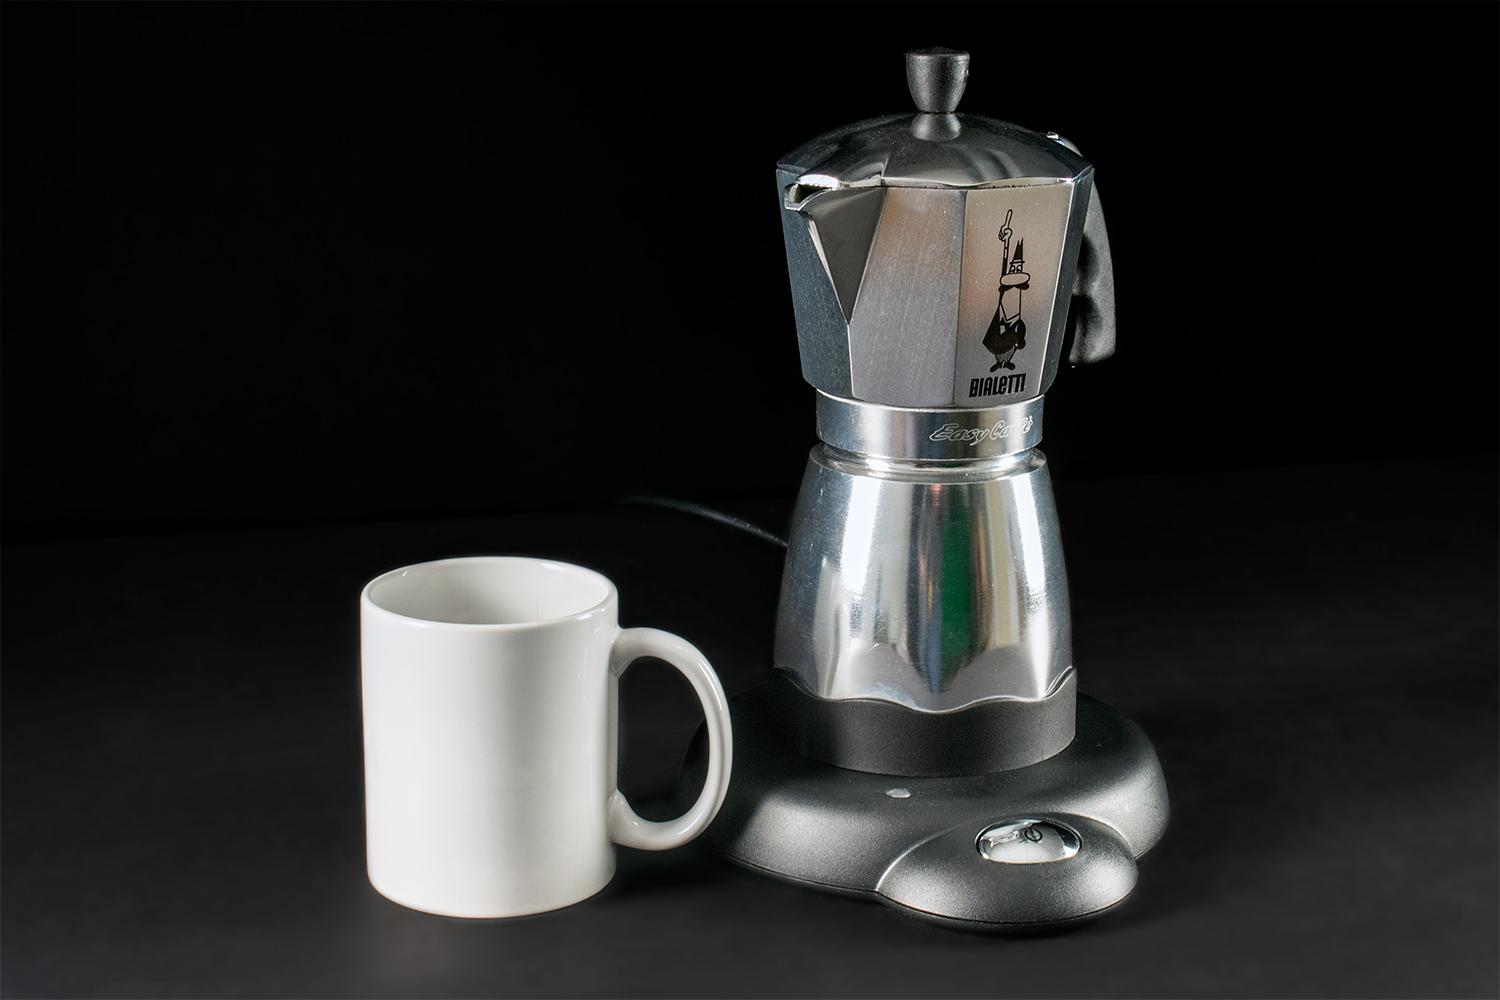 https://www.digitaltrends.com/wp-content/uploads/2014/01/Bialetti-Easy-Caf%C3%A9.jpg?fit=500%2C334&p=1